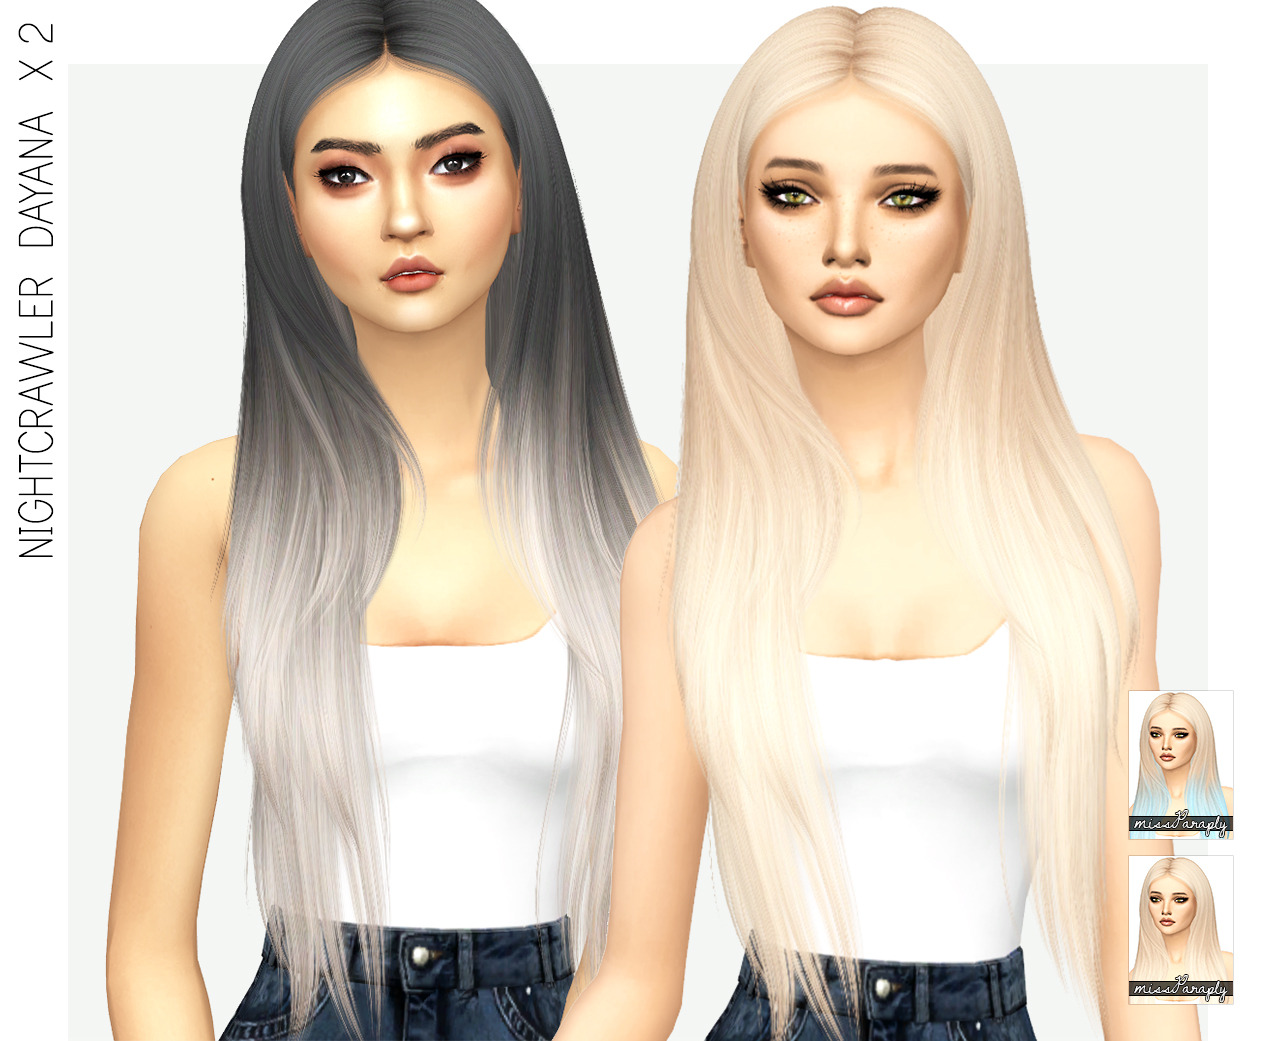 Best Blonde Hair Mods for Sims 4 - wide 7